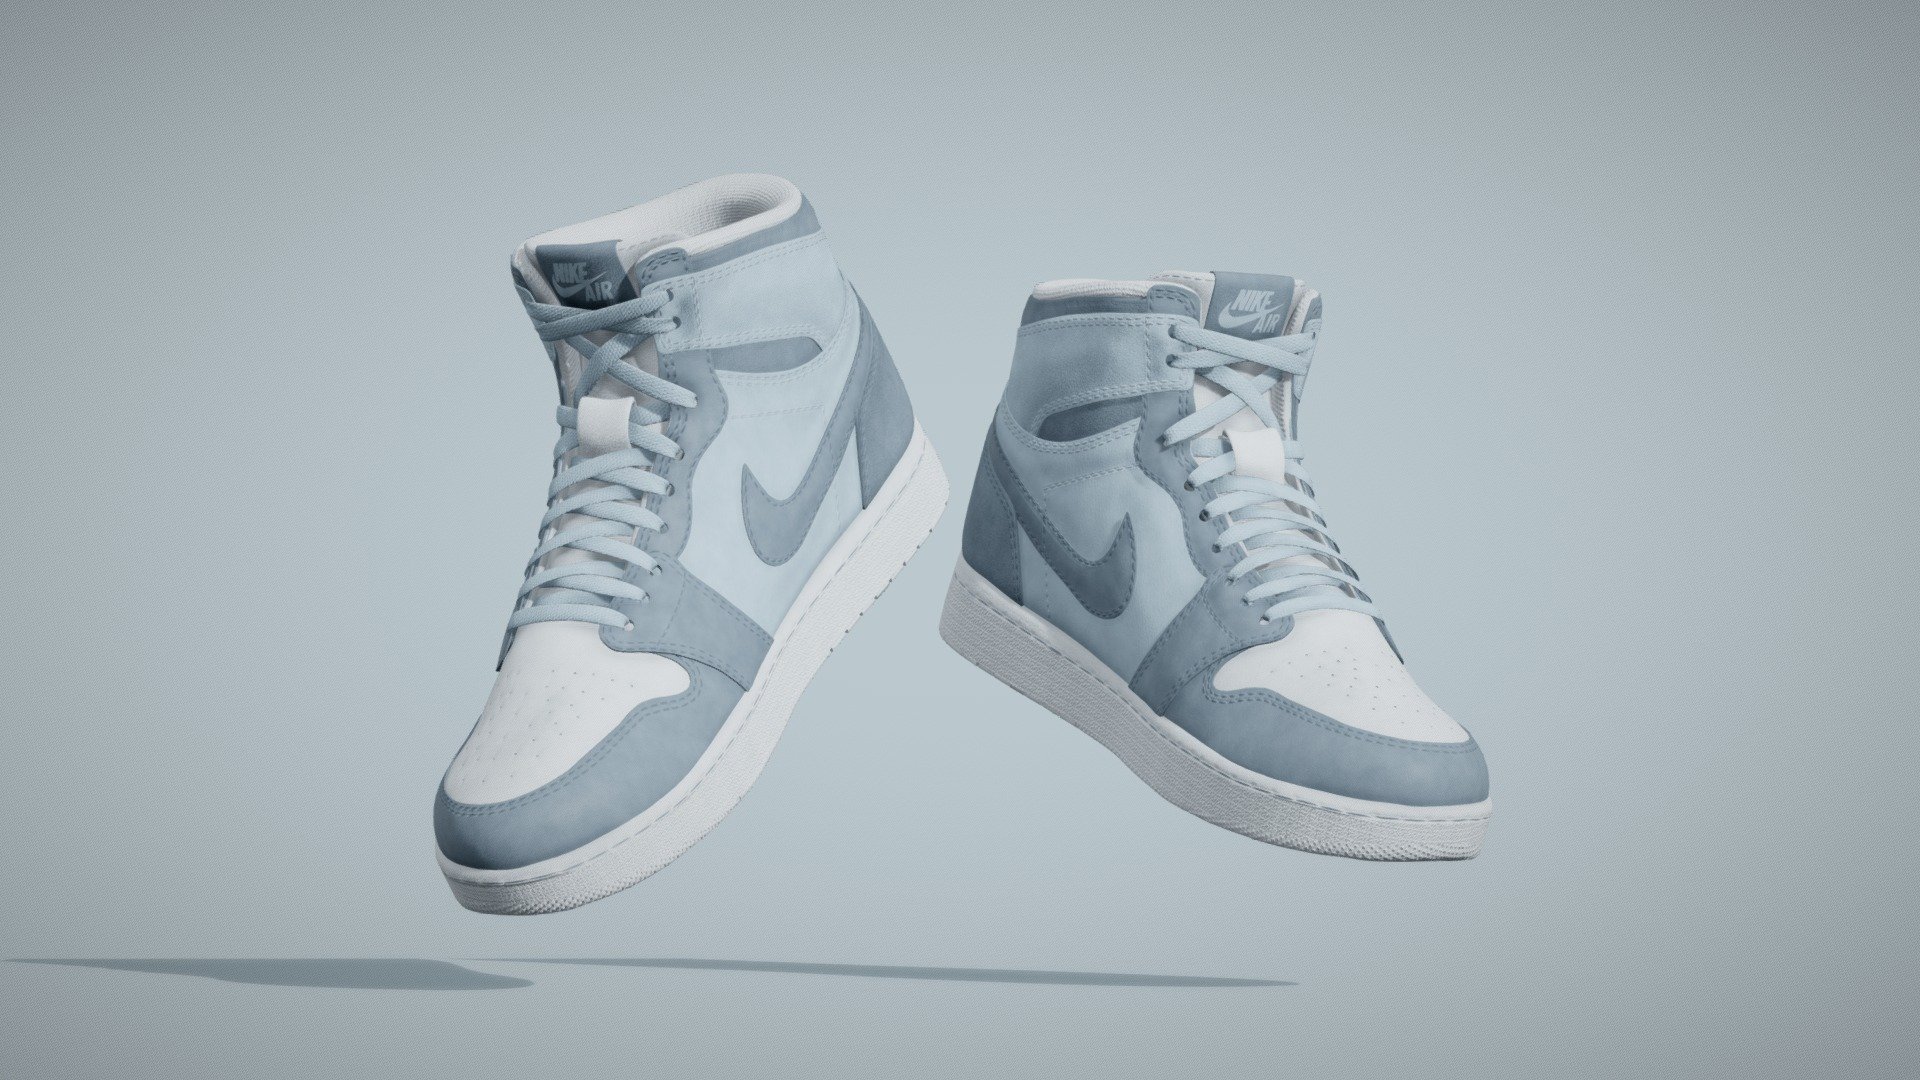 It is a High Quality Air Jordan NIKE Shoes 3d model

Modeling : Modeled with fine Details, Will be perfect for any Cool 3d character Project, Or can be traits of NFT Character

Texture : Textured in High quality 4k texture ( 2 Material - 1 left shoe/2 Right Shoe )

Variants : There are 10 different textures set and this is 7 of 10 Variants.

Feel free to comment for review of this model or any suggestions 3d model